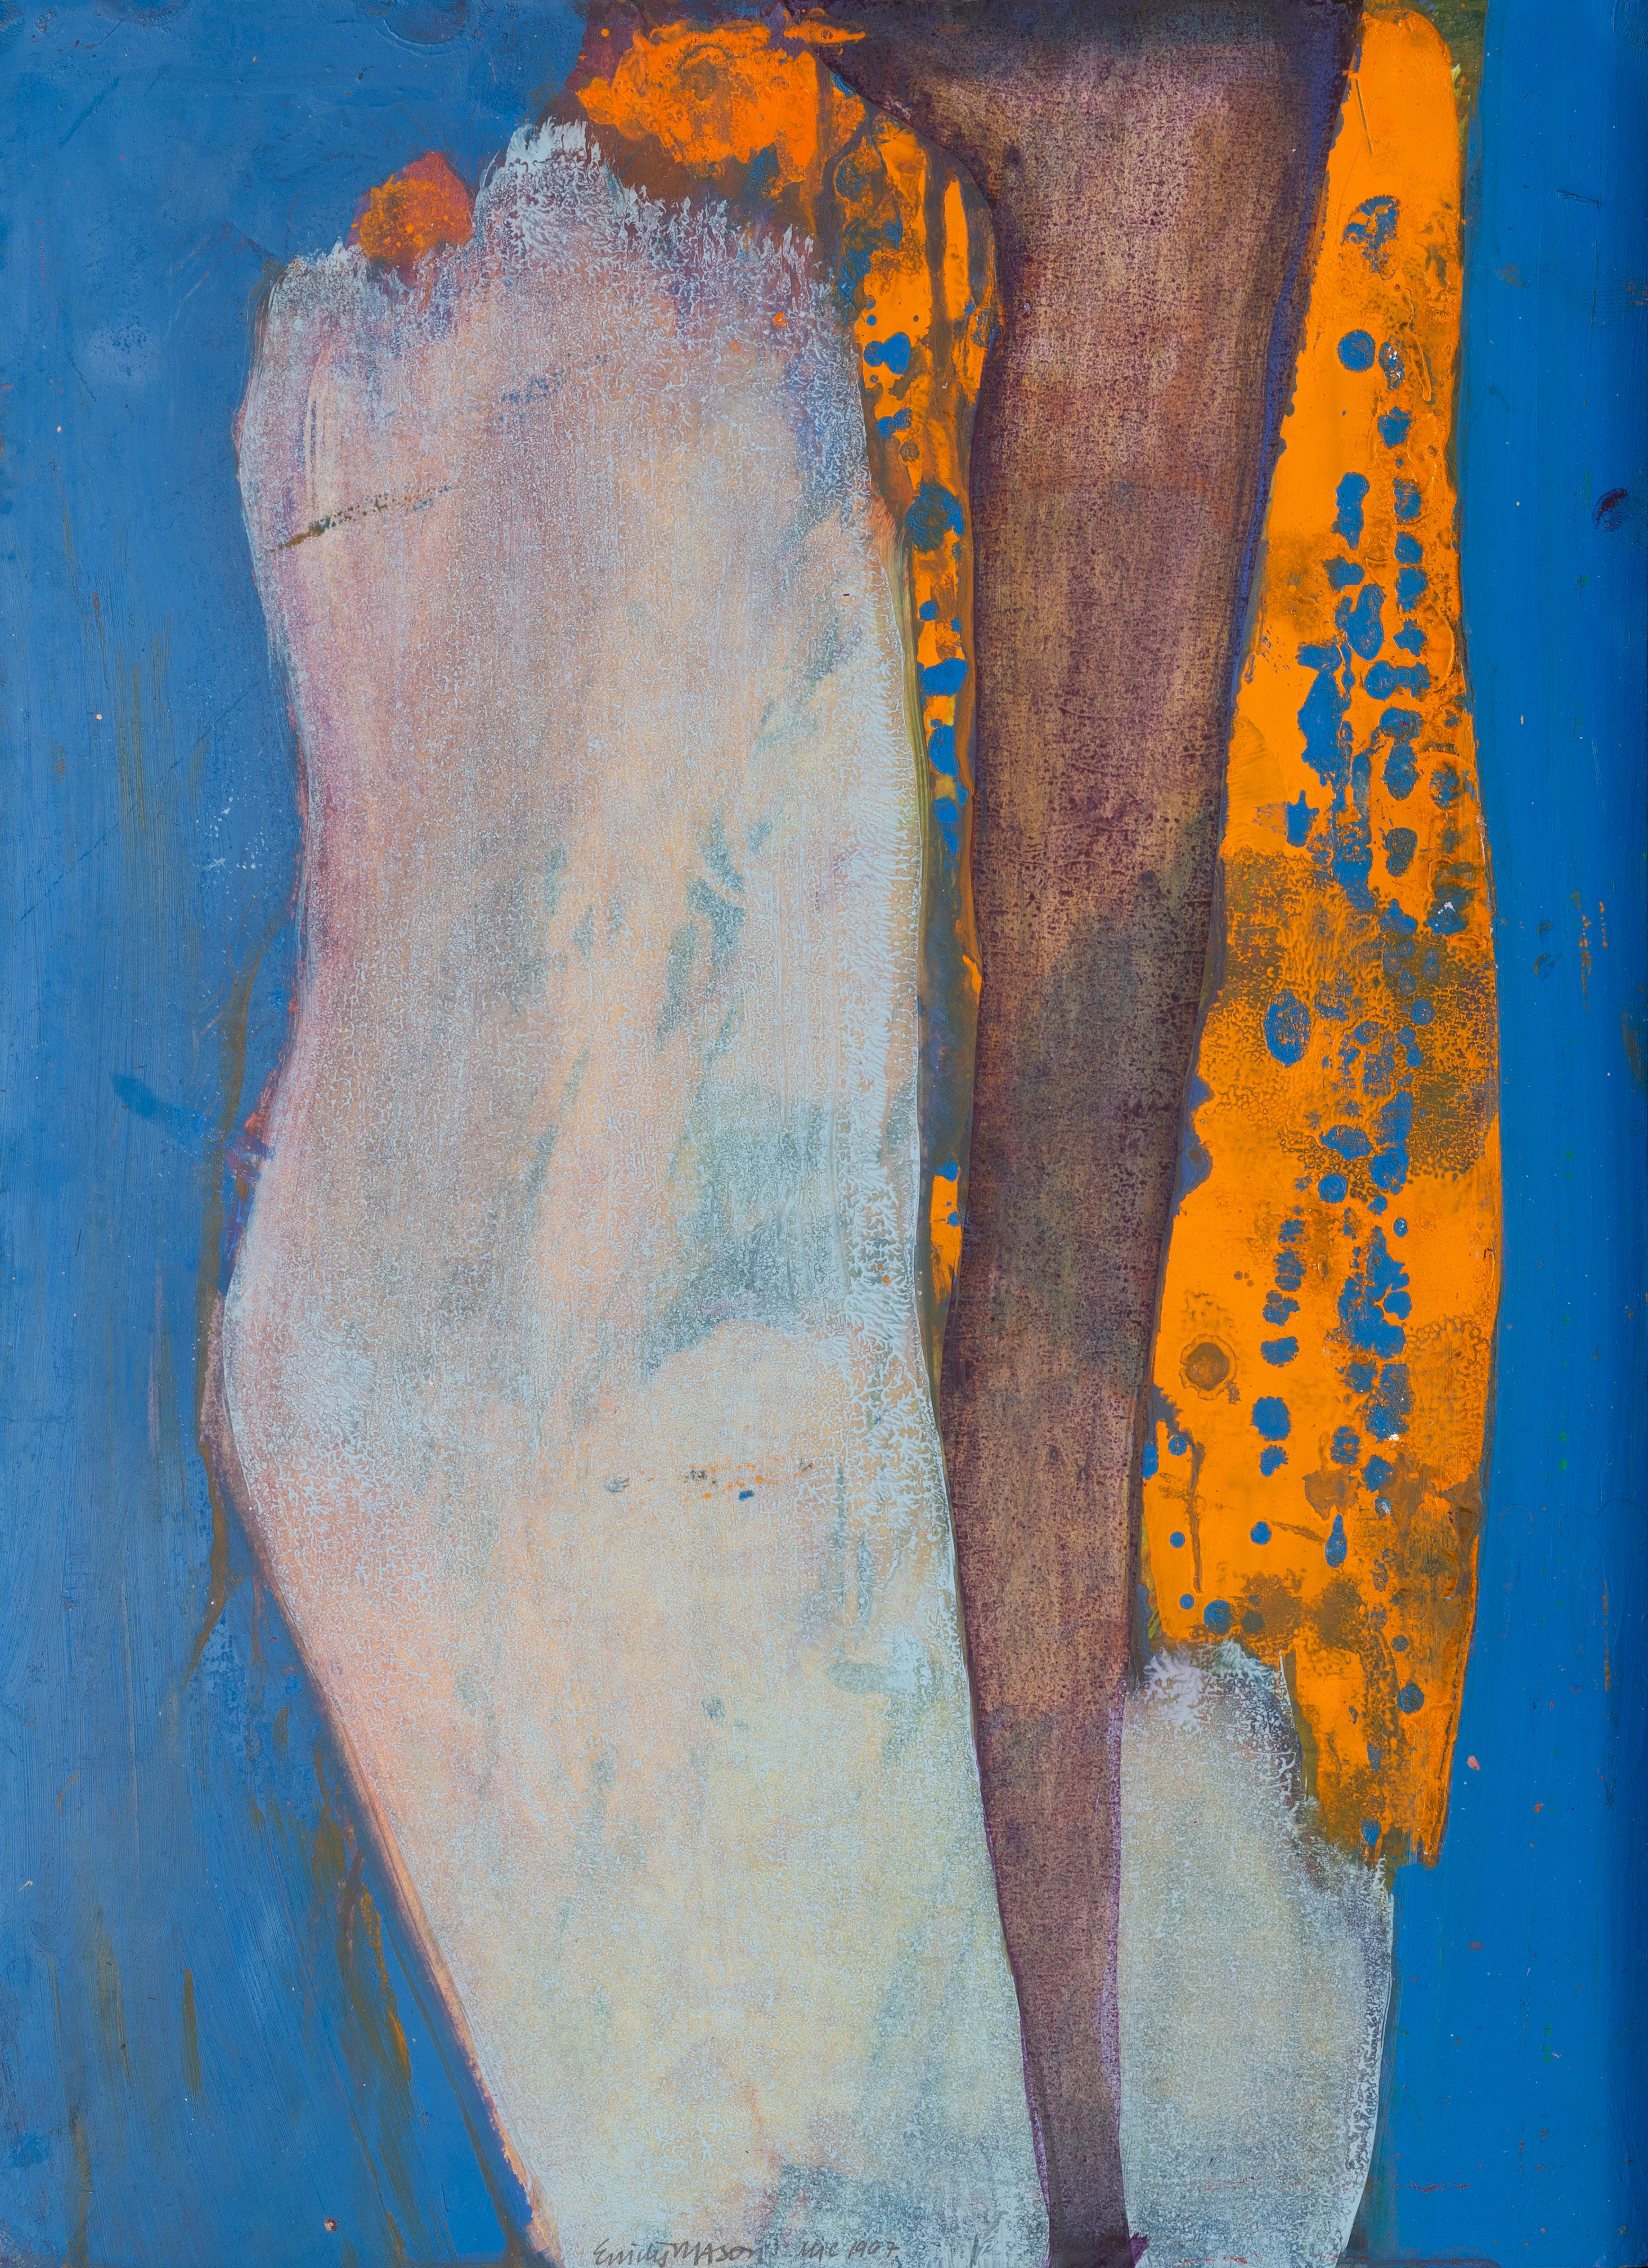 Abstract oil on paper work with a grey, brown, and orange vertical form in the center, and a blue background.